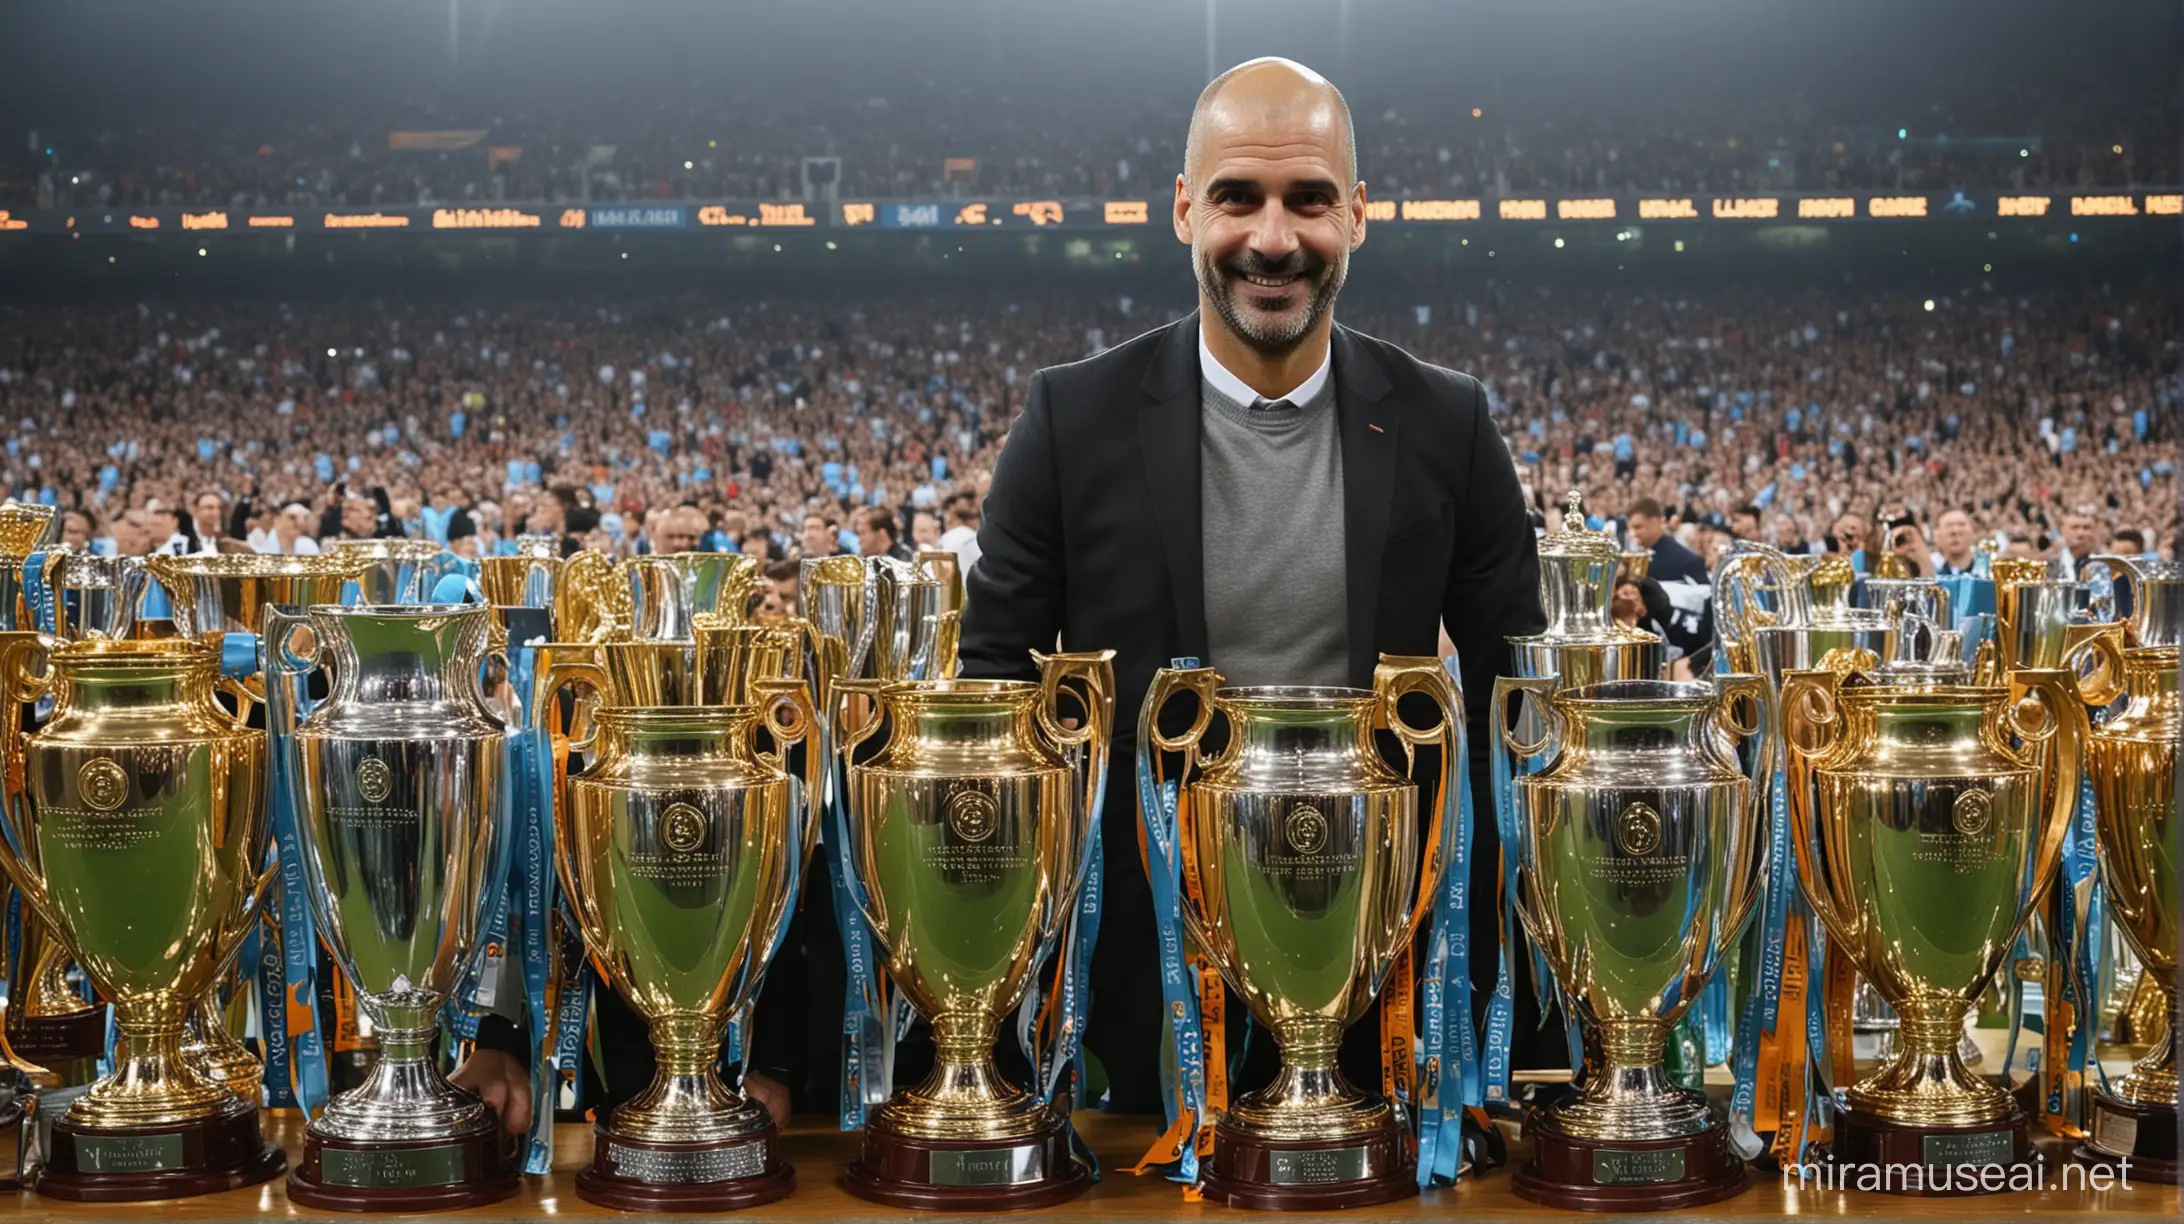 Pep Guardiola Surrounded by Trophies Celebrating Success in Football Management